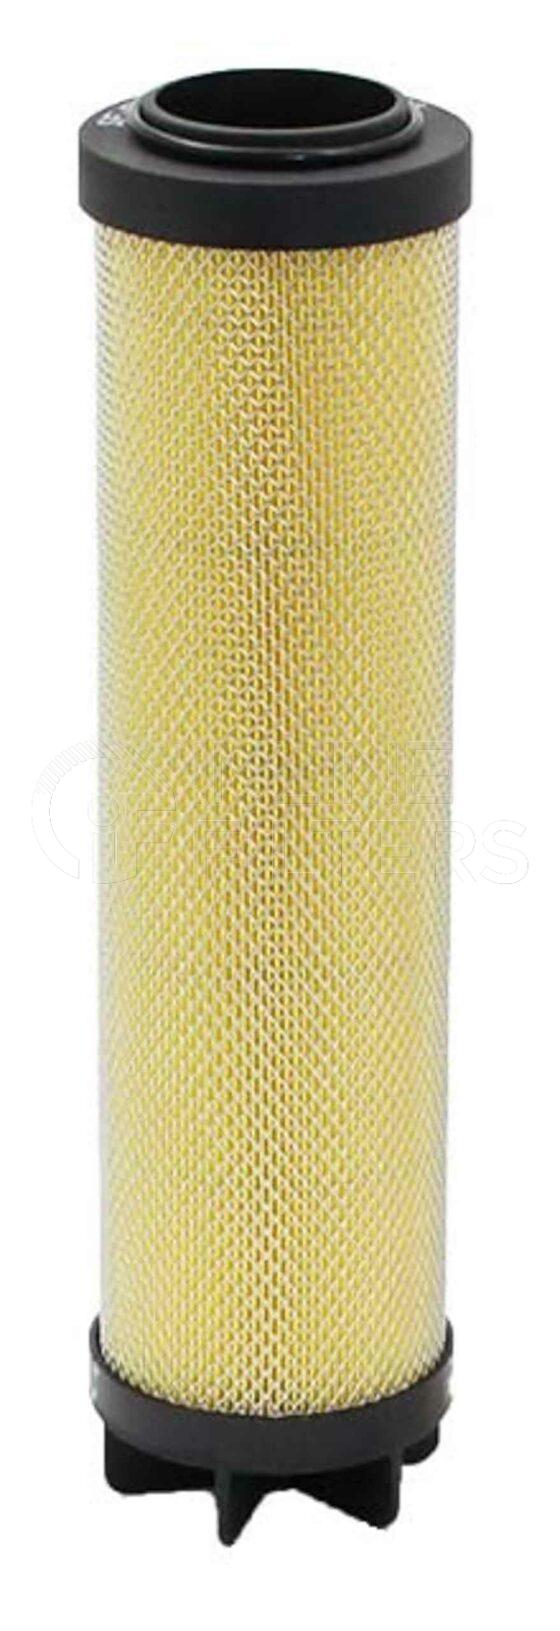 Inline FA13439. Air Filter Product – Compressed Air – Cartridge Product Air filter product